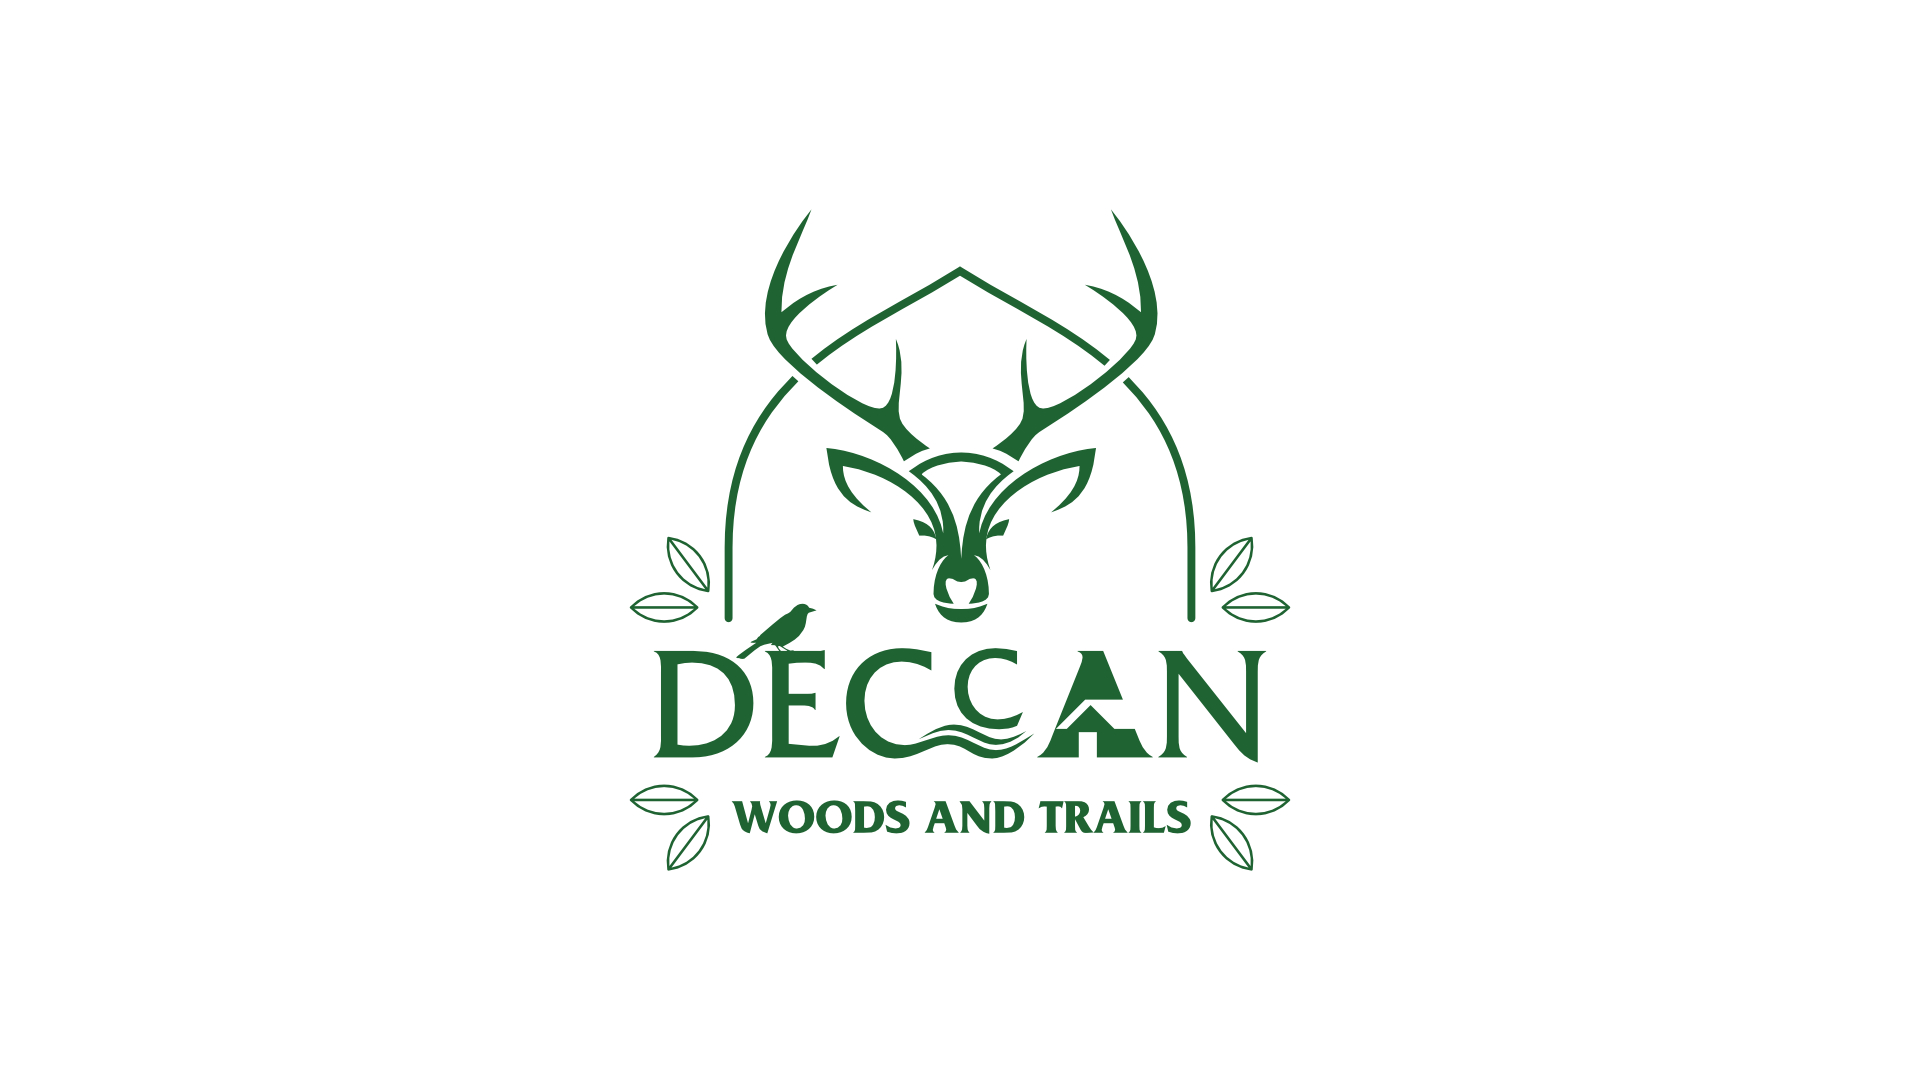 A Gothic arch, a stylized deer face, and foliage come together to create the logo. The background features a Gothic arch, which is common in the Deccan region and represents both a hideaway destination in the woods and a warm namaskaram greeting. In addition, it also represents a refuge from the urban chaos. The visual representation of leaves, which stands in for the surrounding flora, completes the logo. The title ‘DECCAN WOODS AND TRAILS’ is placed below the logo form; A bird, a stream, and a shack are blended with the title to suit the visual form above.	The logo is presented in a green color for its association with nature.